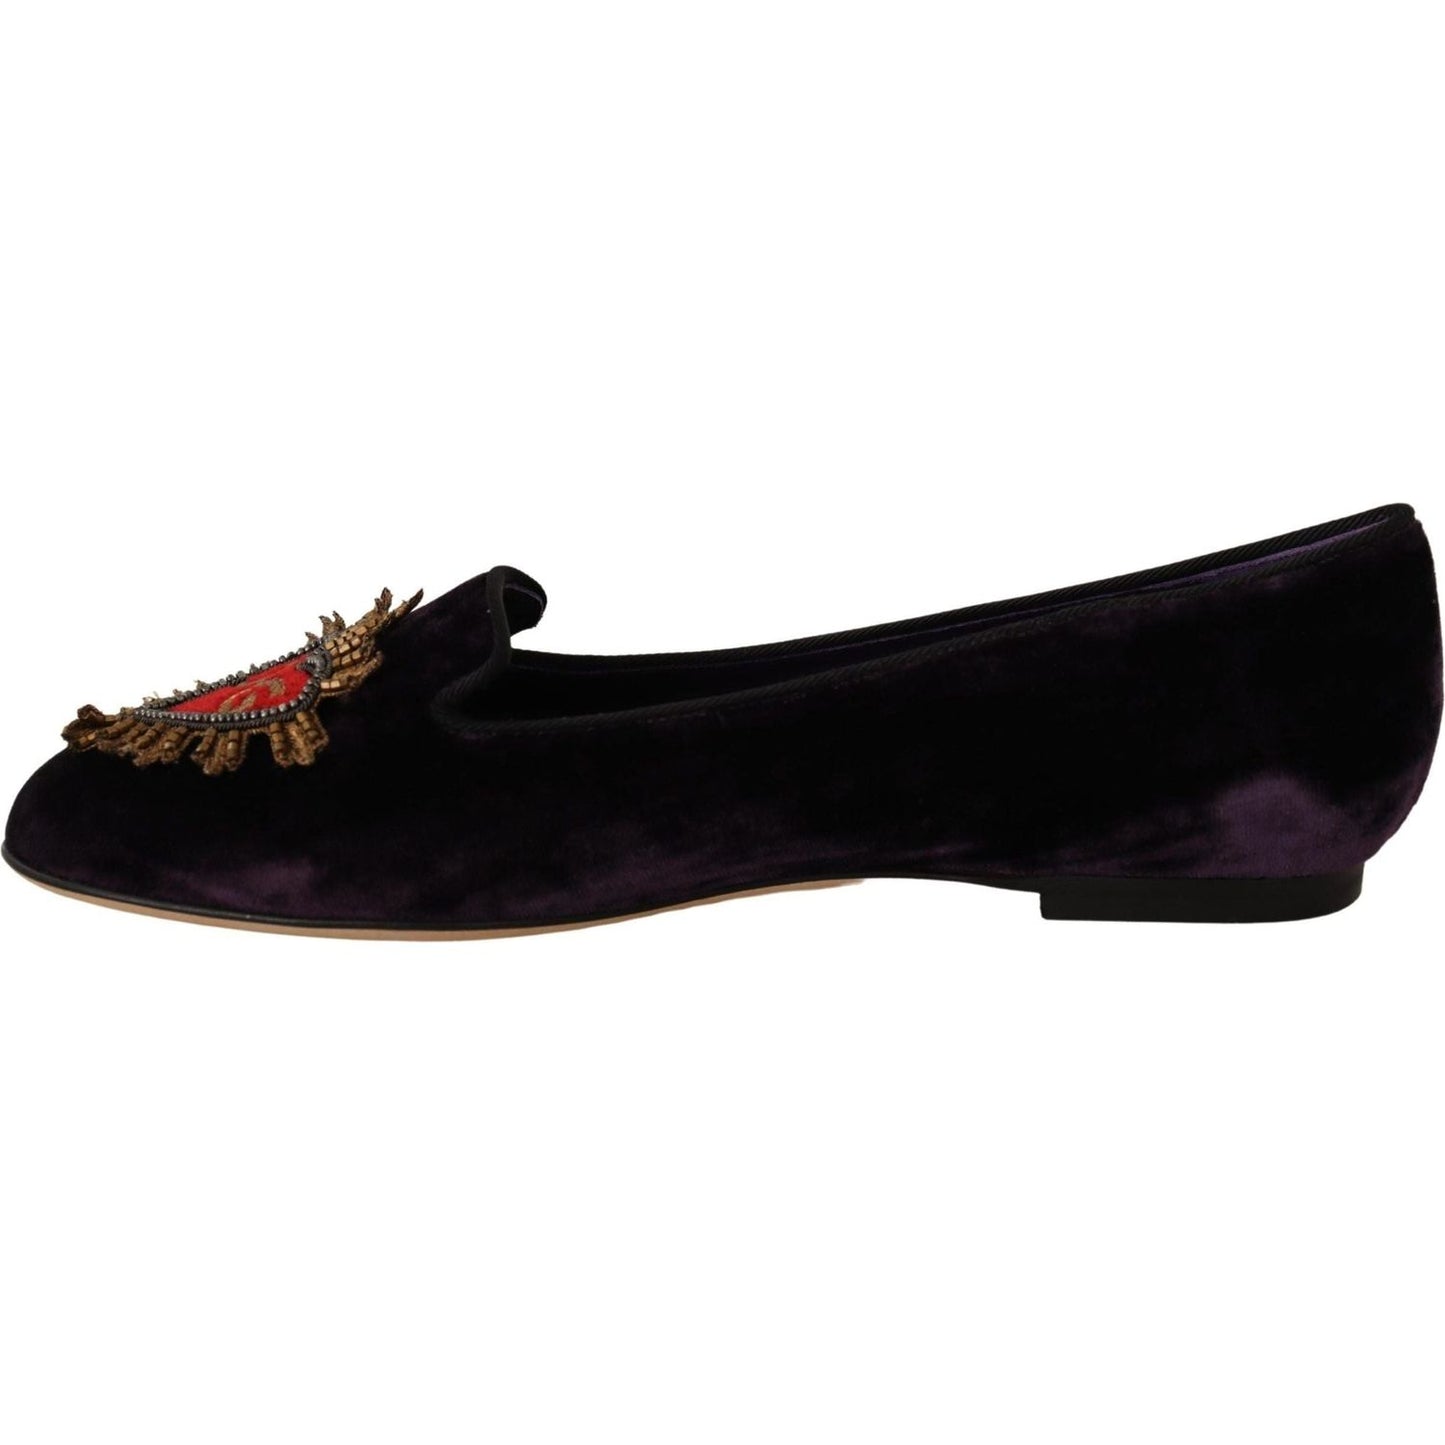 Dolce & Gabbana Chic Purple Velvet Loafers with Heart Detail purple-velvet-dg-heart-loafers-flats-shoes IMG_6018-scaled-4f19e167-556.jpg